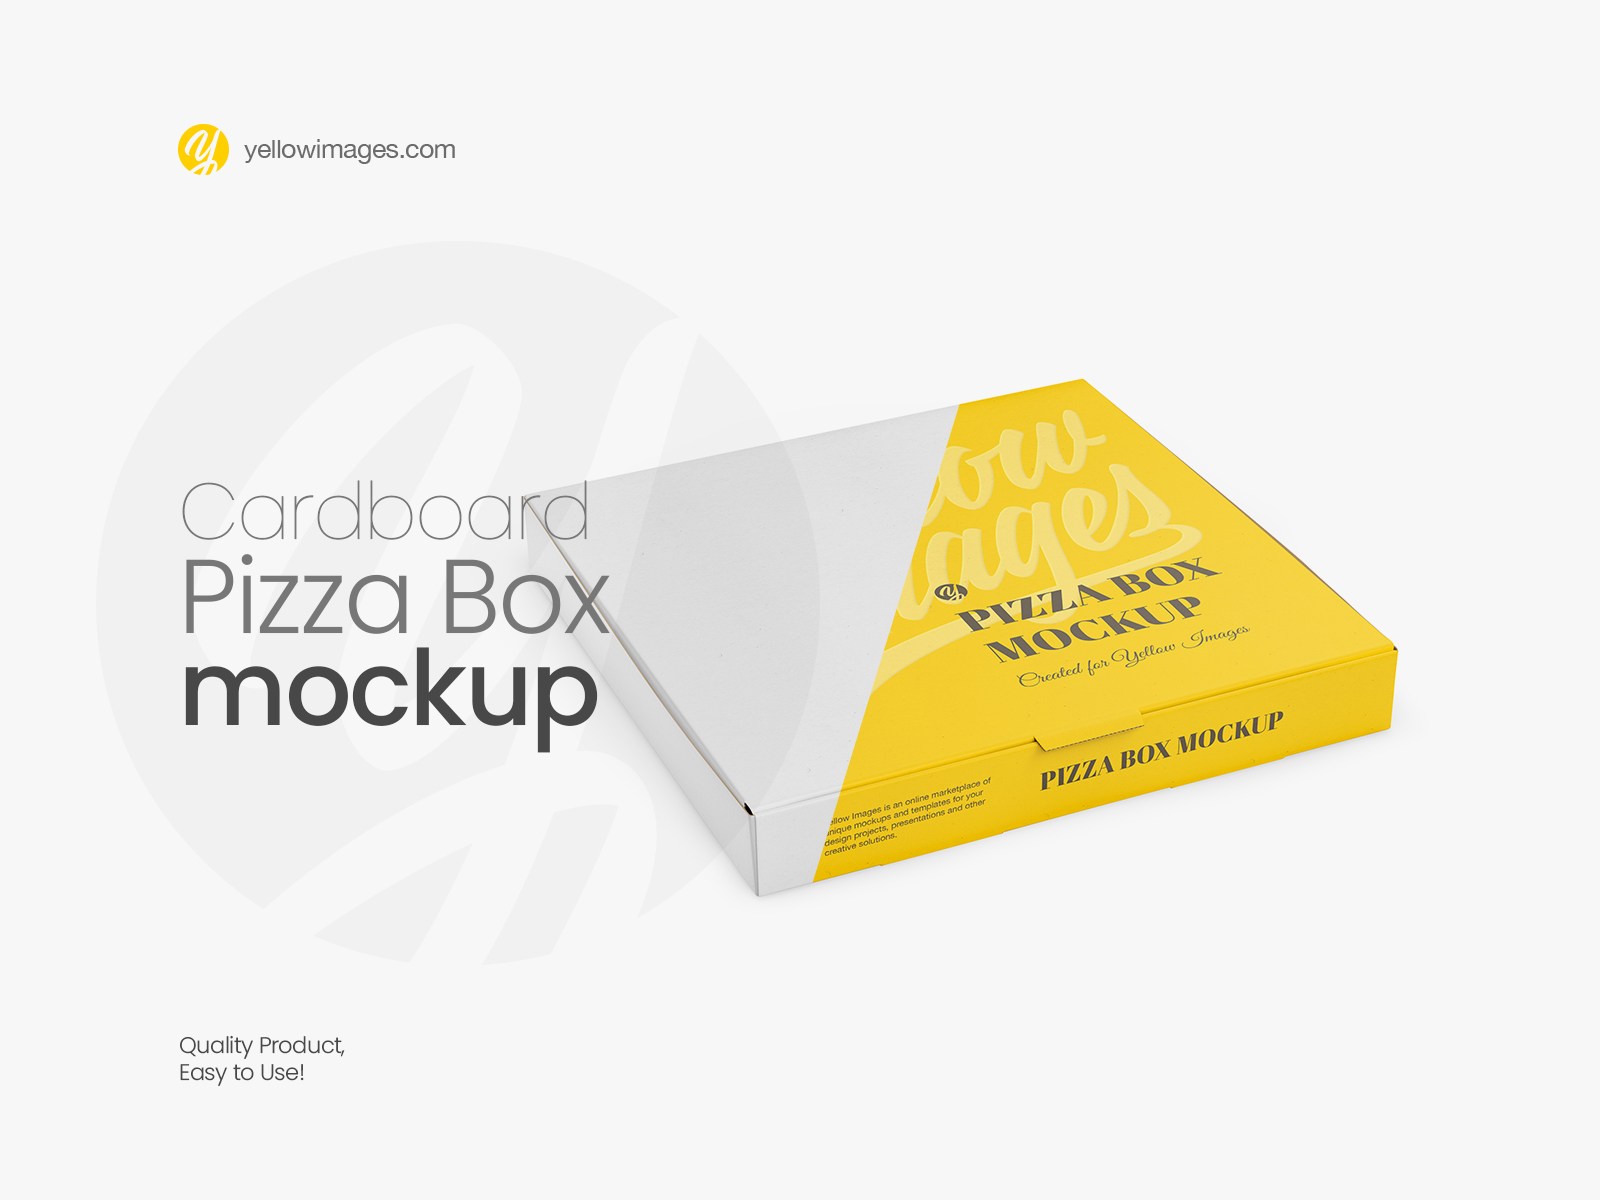 Download Package Box Mockup Psd Download Free And Premium Psd Mockup Templates And Design Assets PSD Mockup Templates